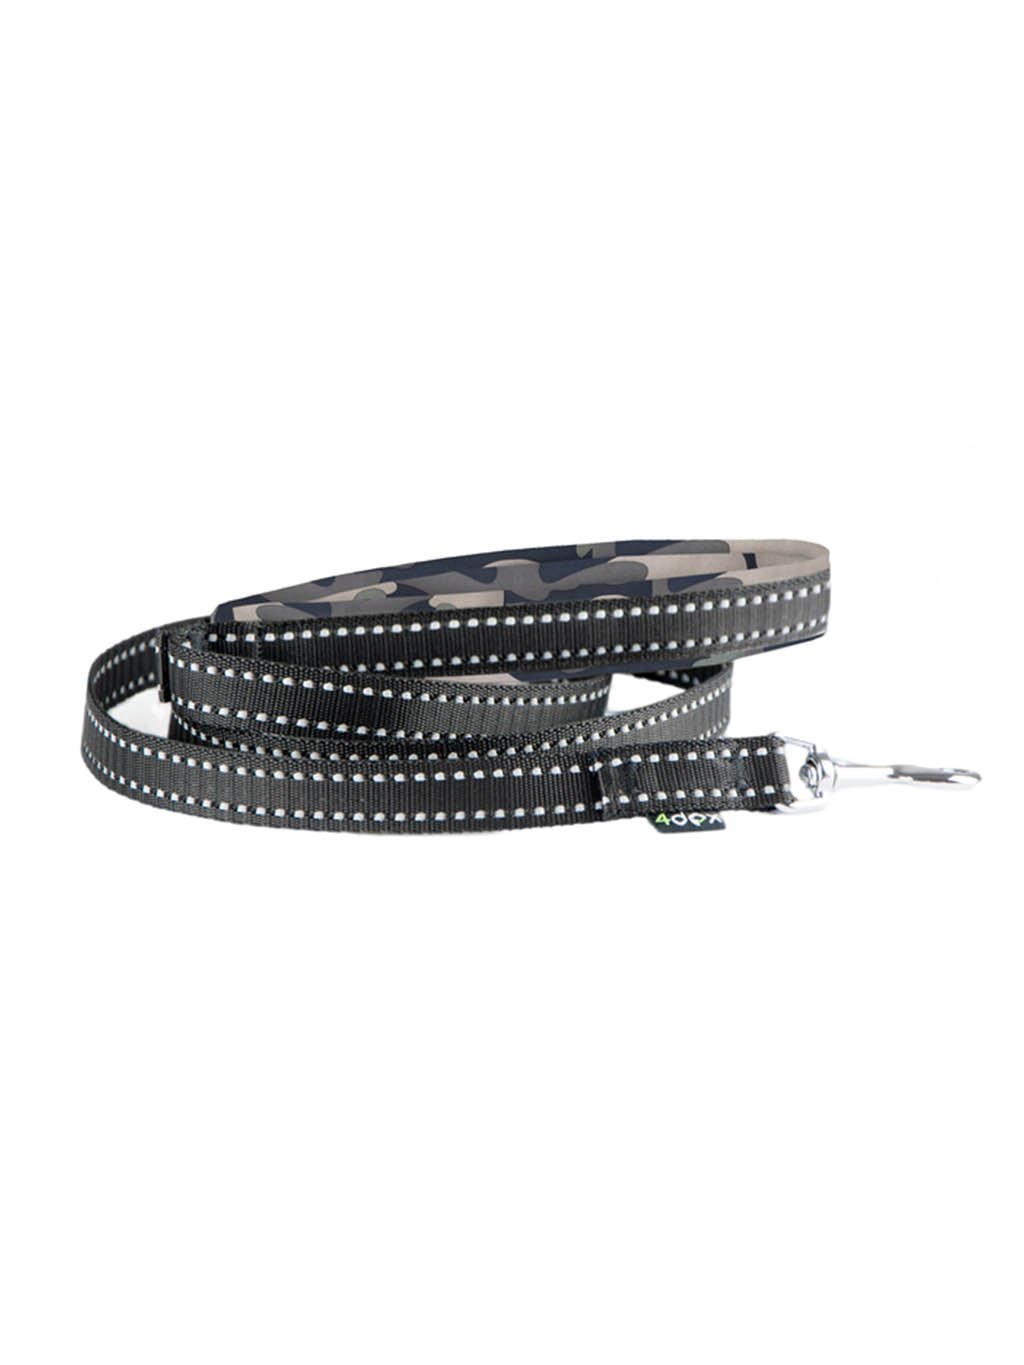 Leash with a reflective tape, CAMOUFLAGE